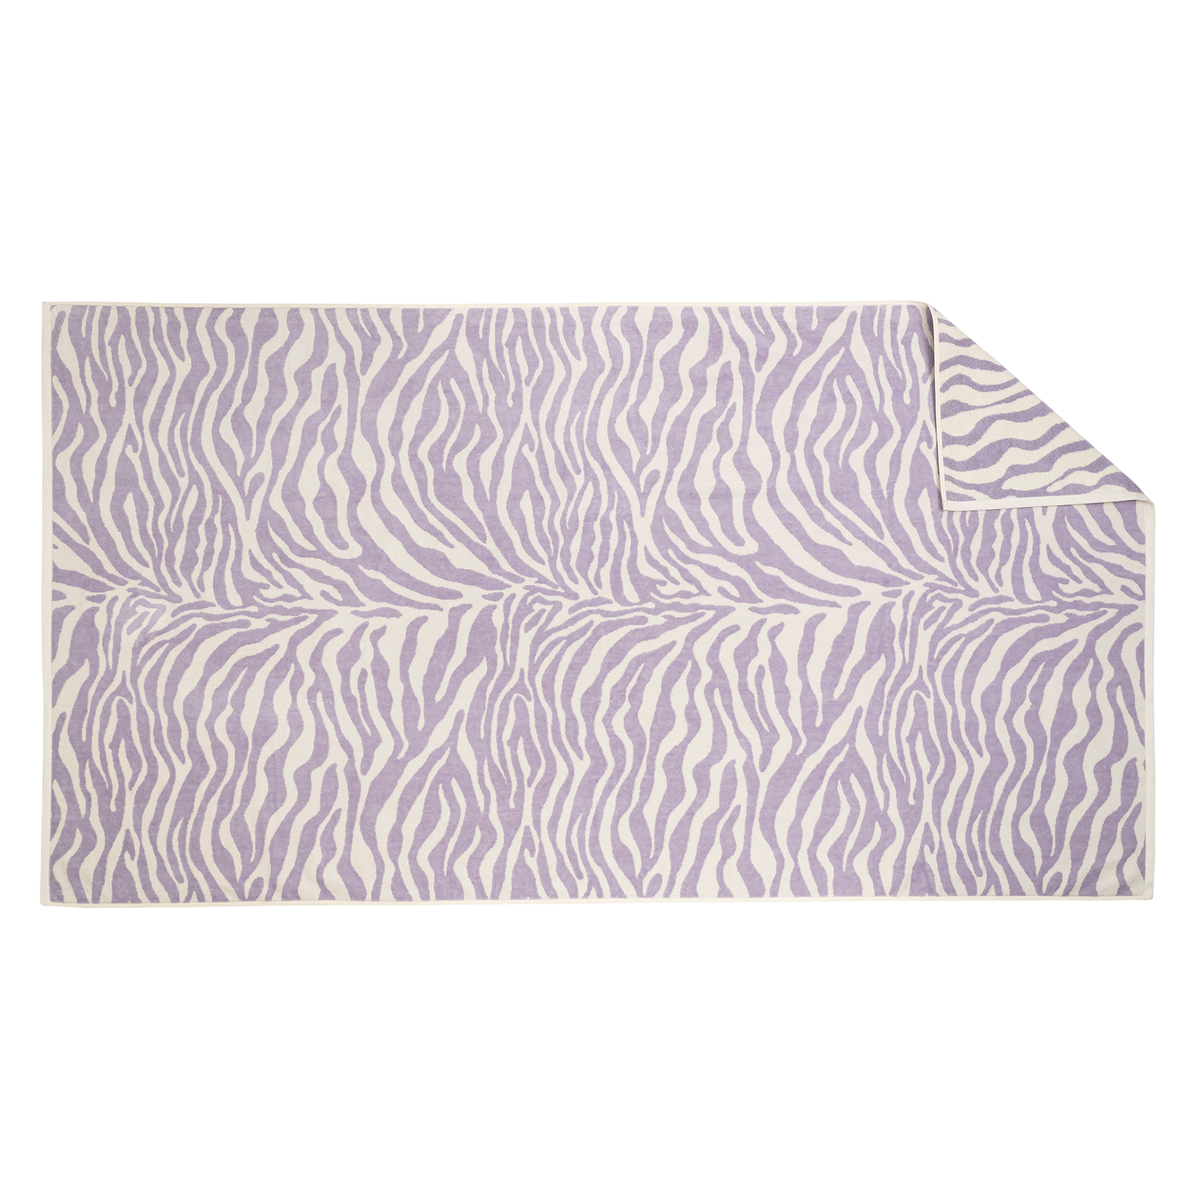 Flat Silo Image of Matouk Santiago Beach Towels in Color Orchid